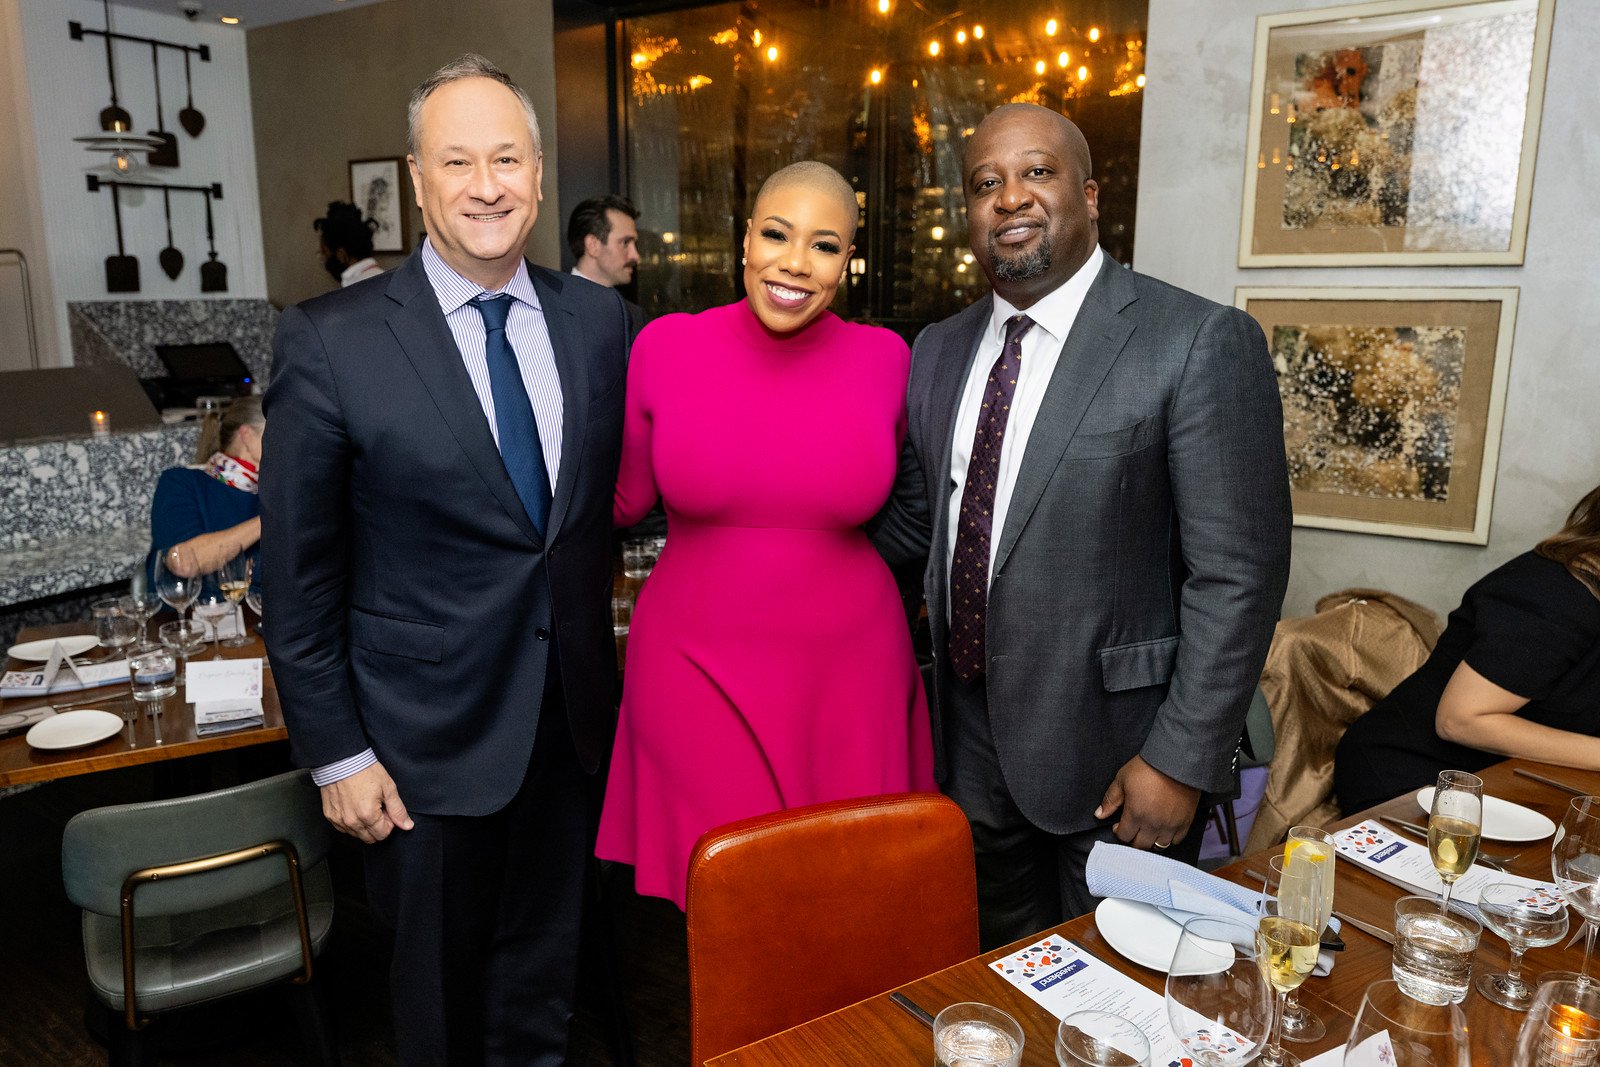  Second Gentleman of the United States Mr. Douglas Emhoff with Shawn Townsend and Symone during a celebratory dinner In honor of “The Weekend.” 